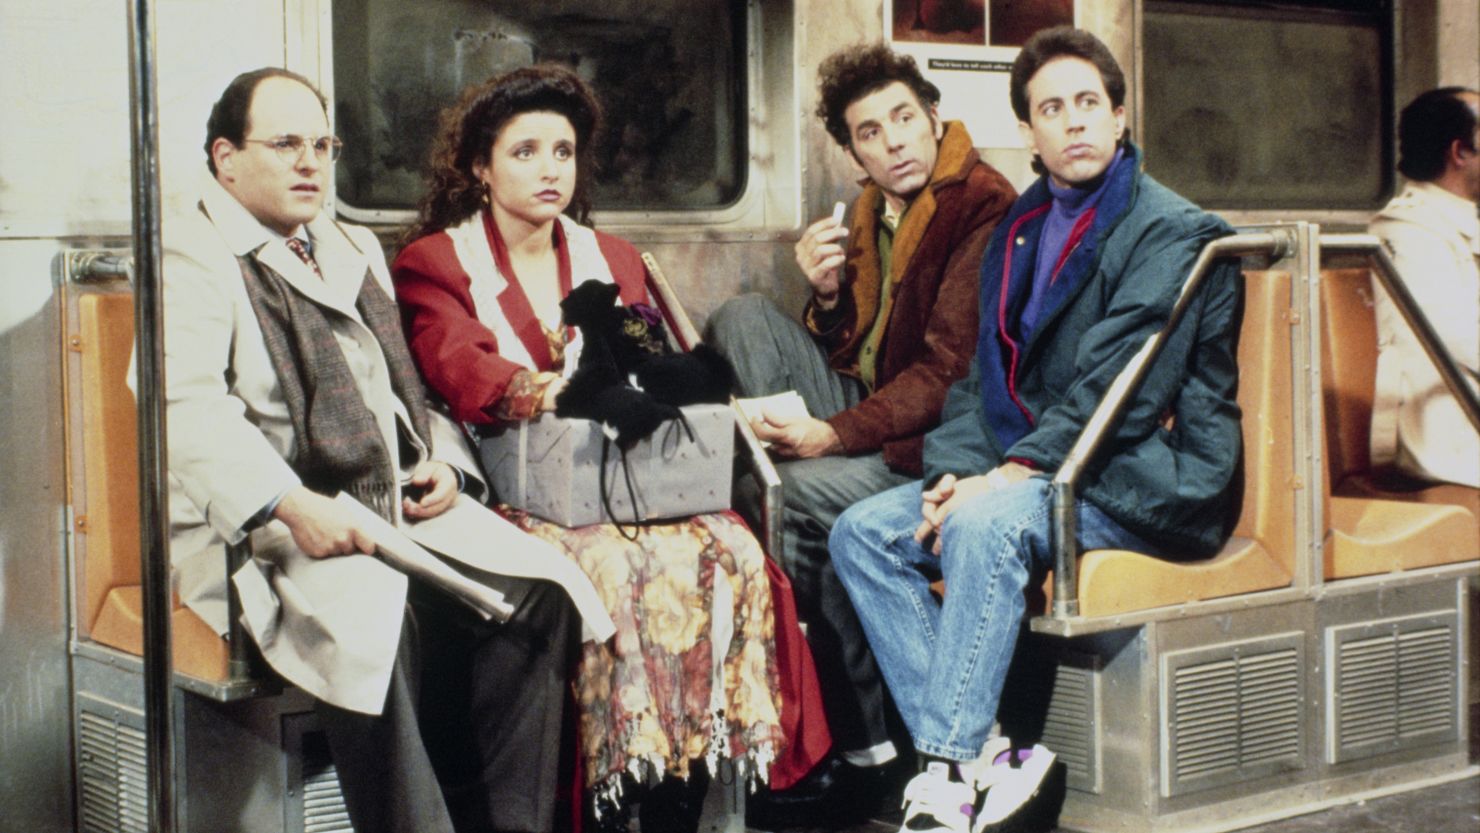 Jason Alexander as George Costanza, Julia Louis-Dreyfus as Elaine Benes, Michael Richards as Cosmo Kramer, and Jerry Seinfeld as Jerry Seinfeld in a scene from "Seinfeld."